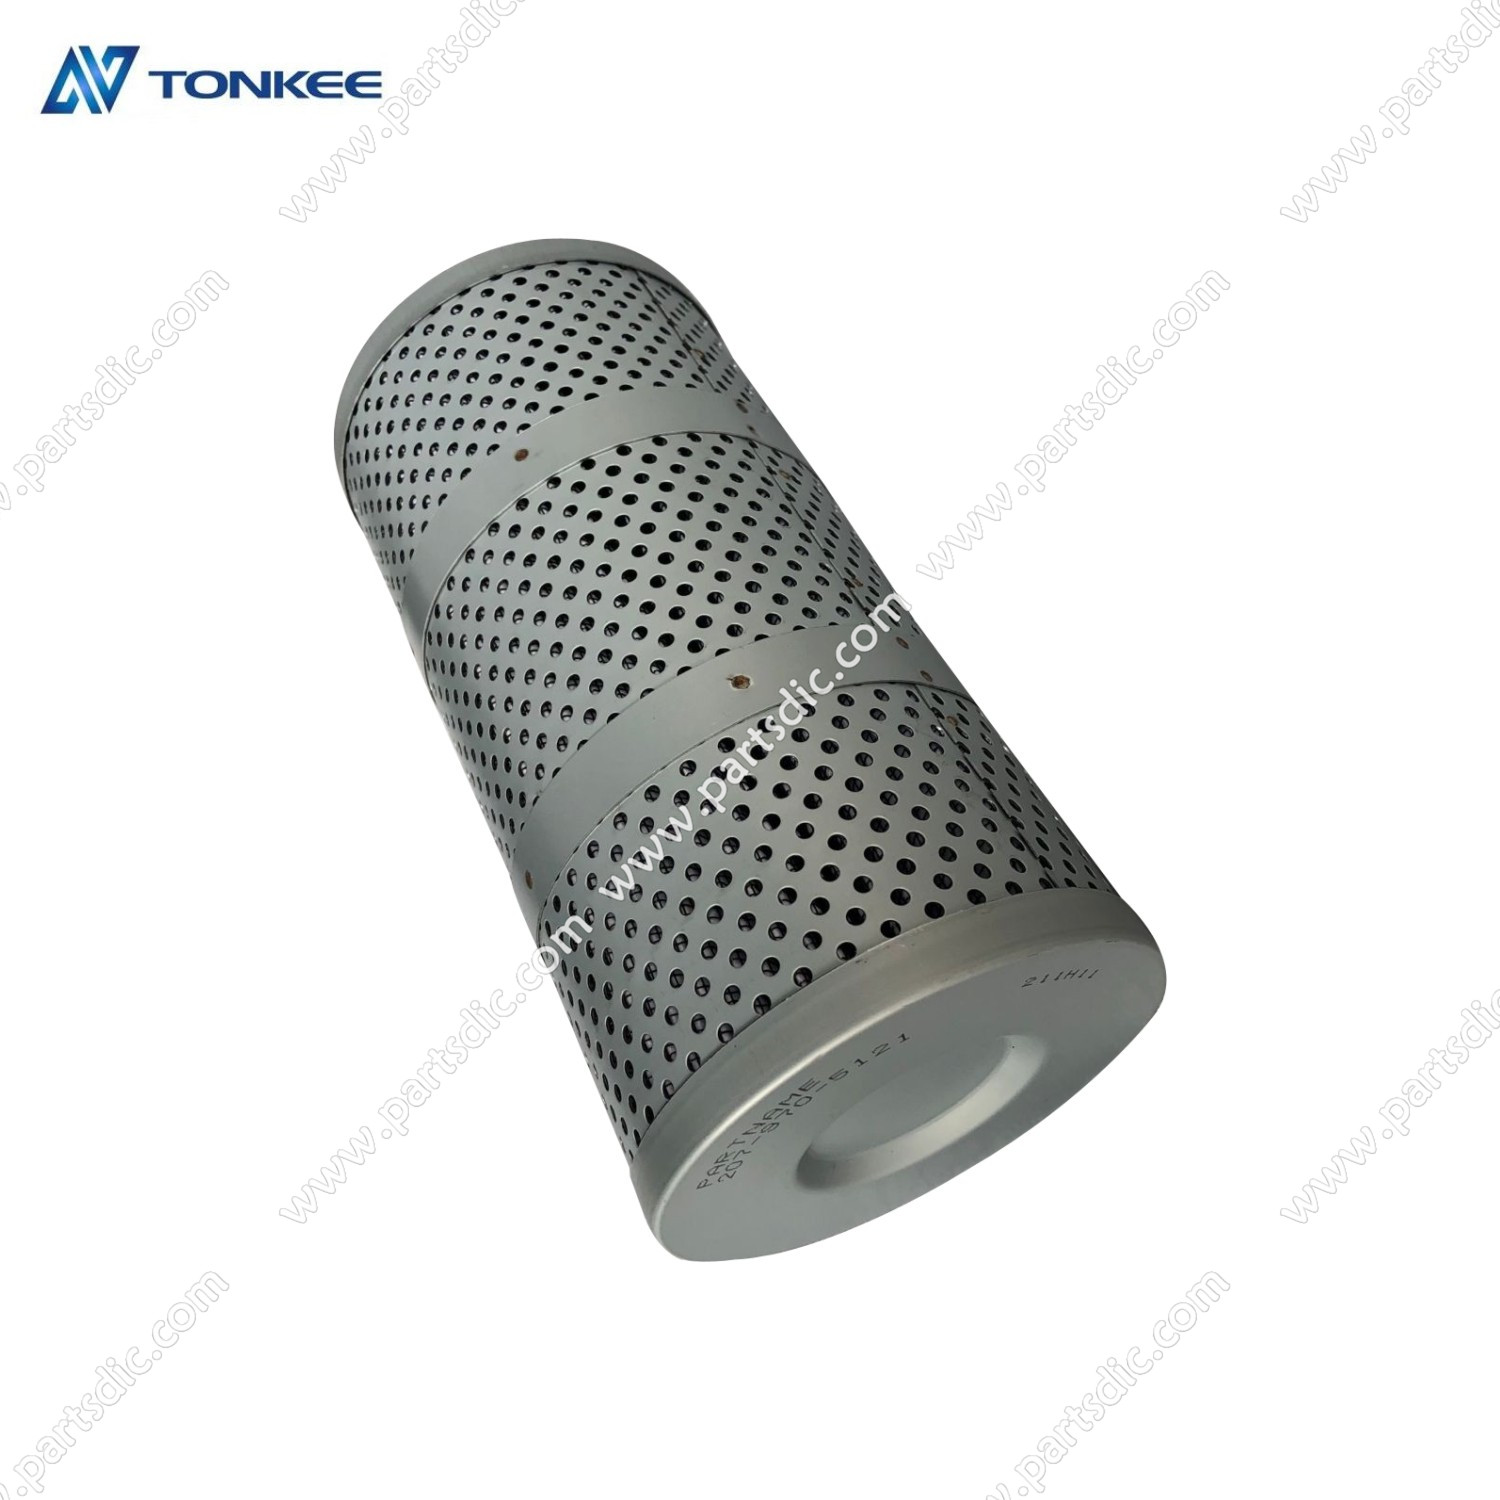 14502887 VOE14502887 hydraulic filter EC210B EC290B EC300D EC360B EC380D EC480E excavator hydraulic return filter suitable for VOLVO (1)